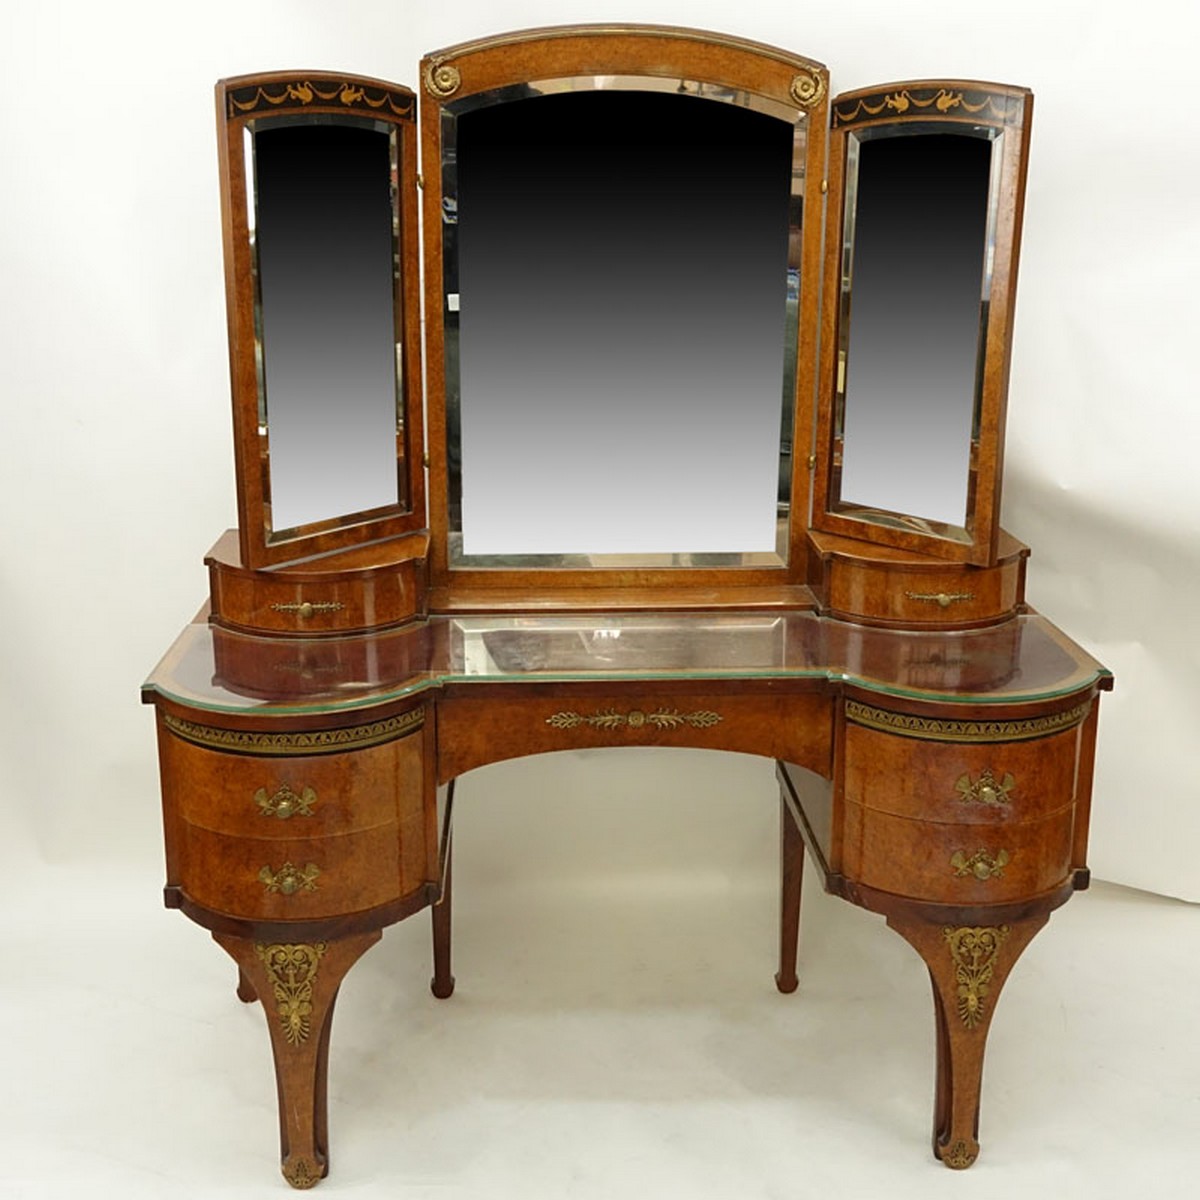 Antique Style French Burlwood Inlaid Gilt Brass Mounted Lady's Dressing Table Mirror. Total of seven drawers, three panel mirror, standing tapering bracket legs.